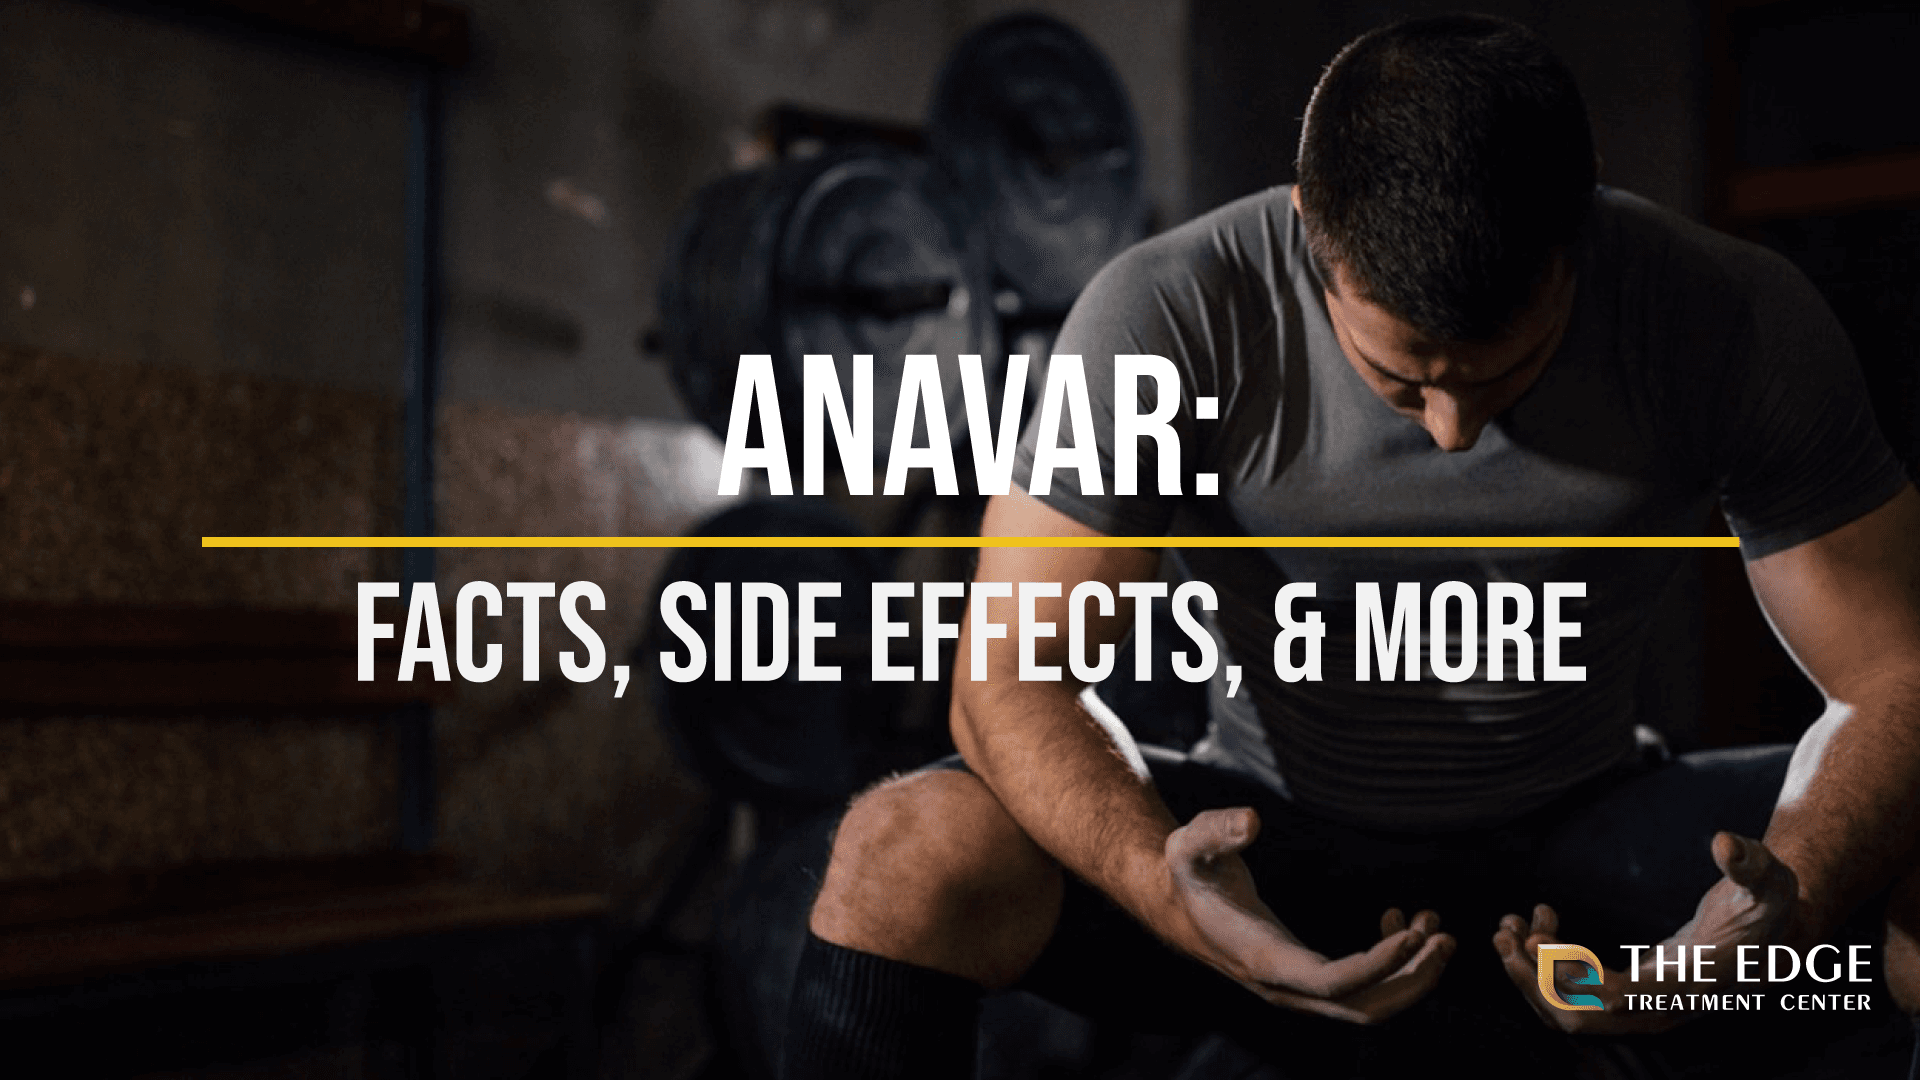 What is Anavar?